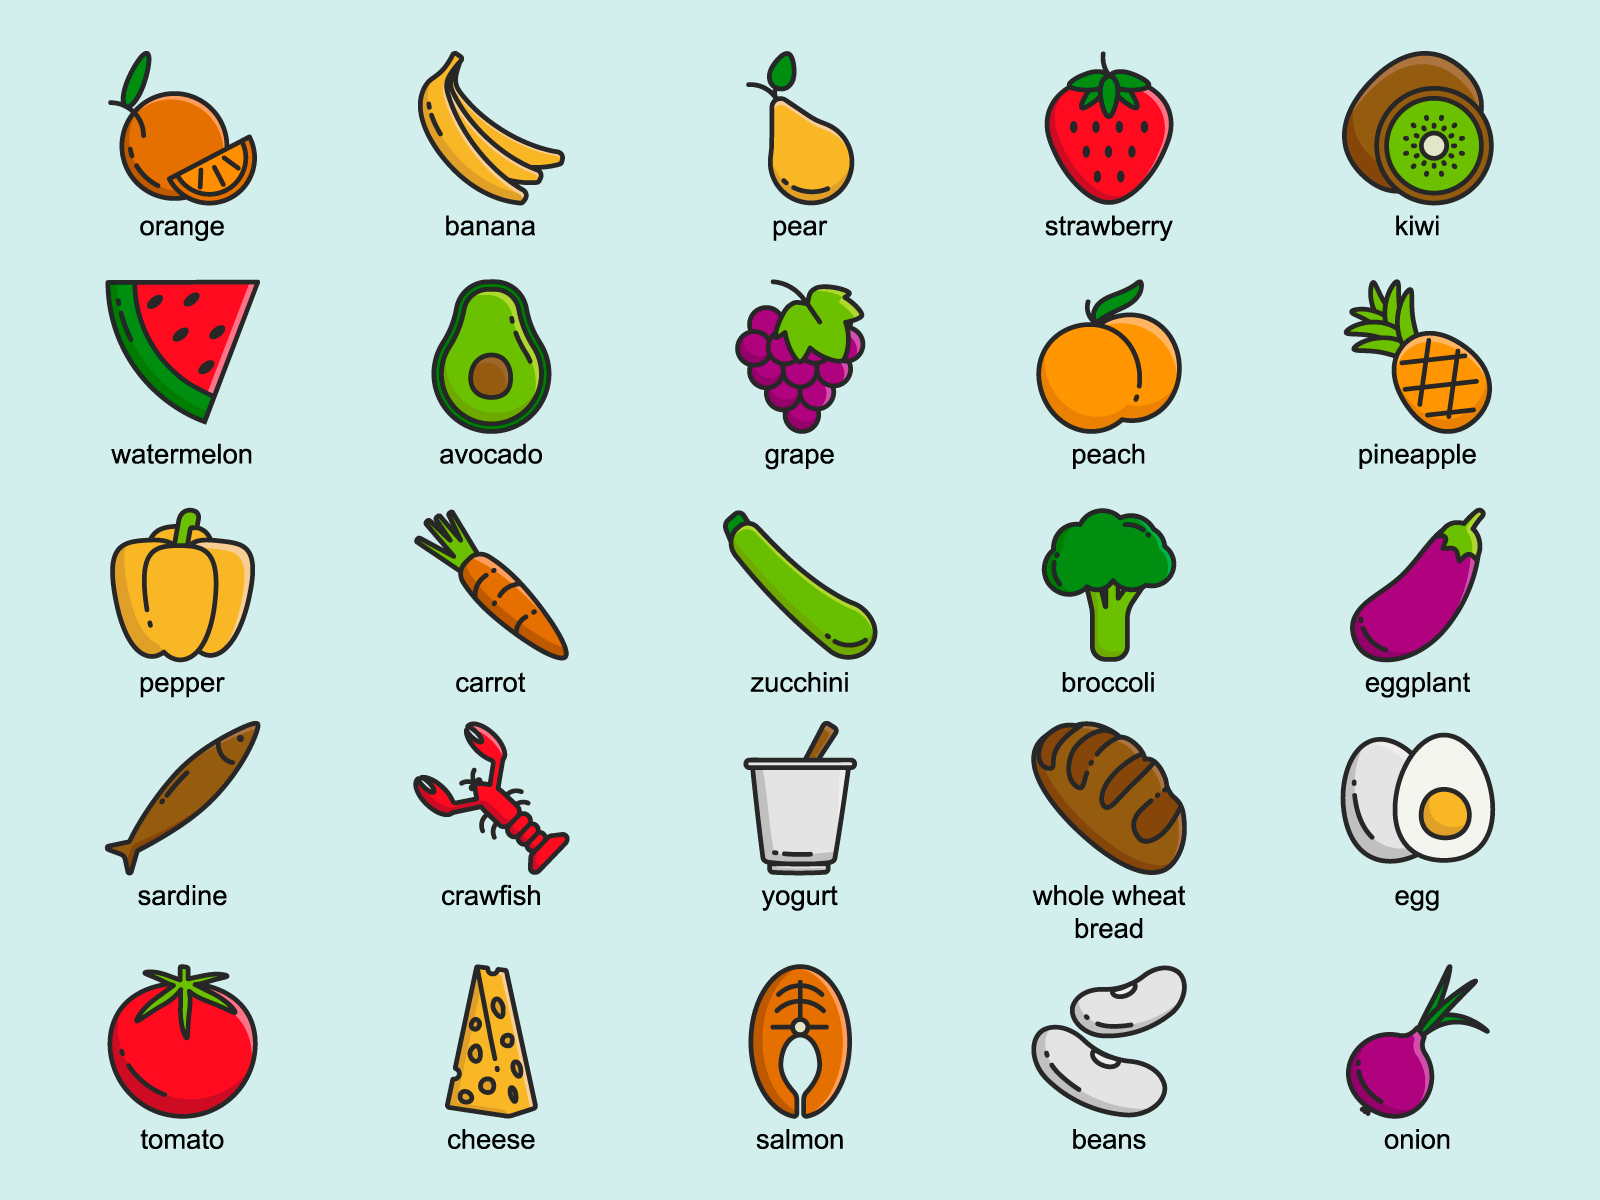 healthy food pictures with names